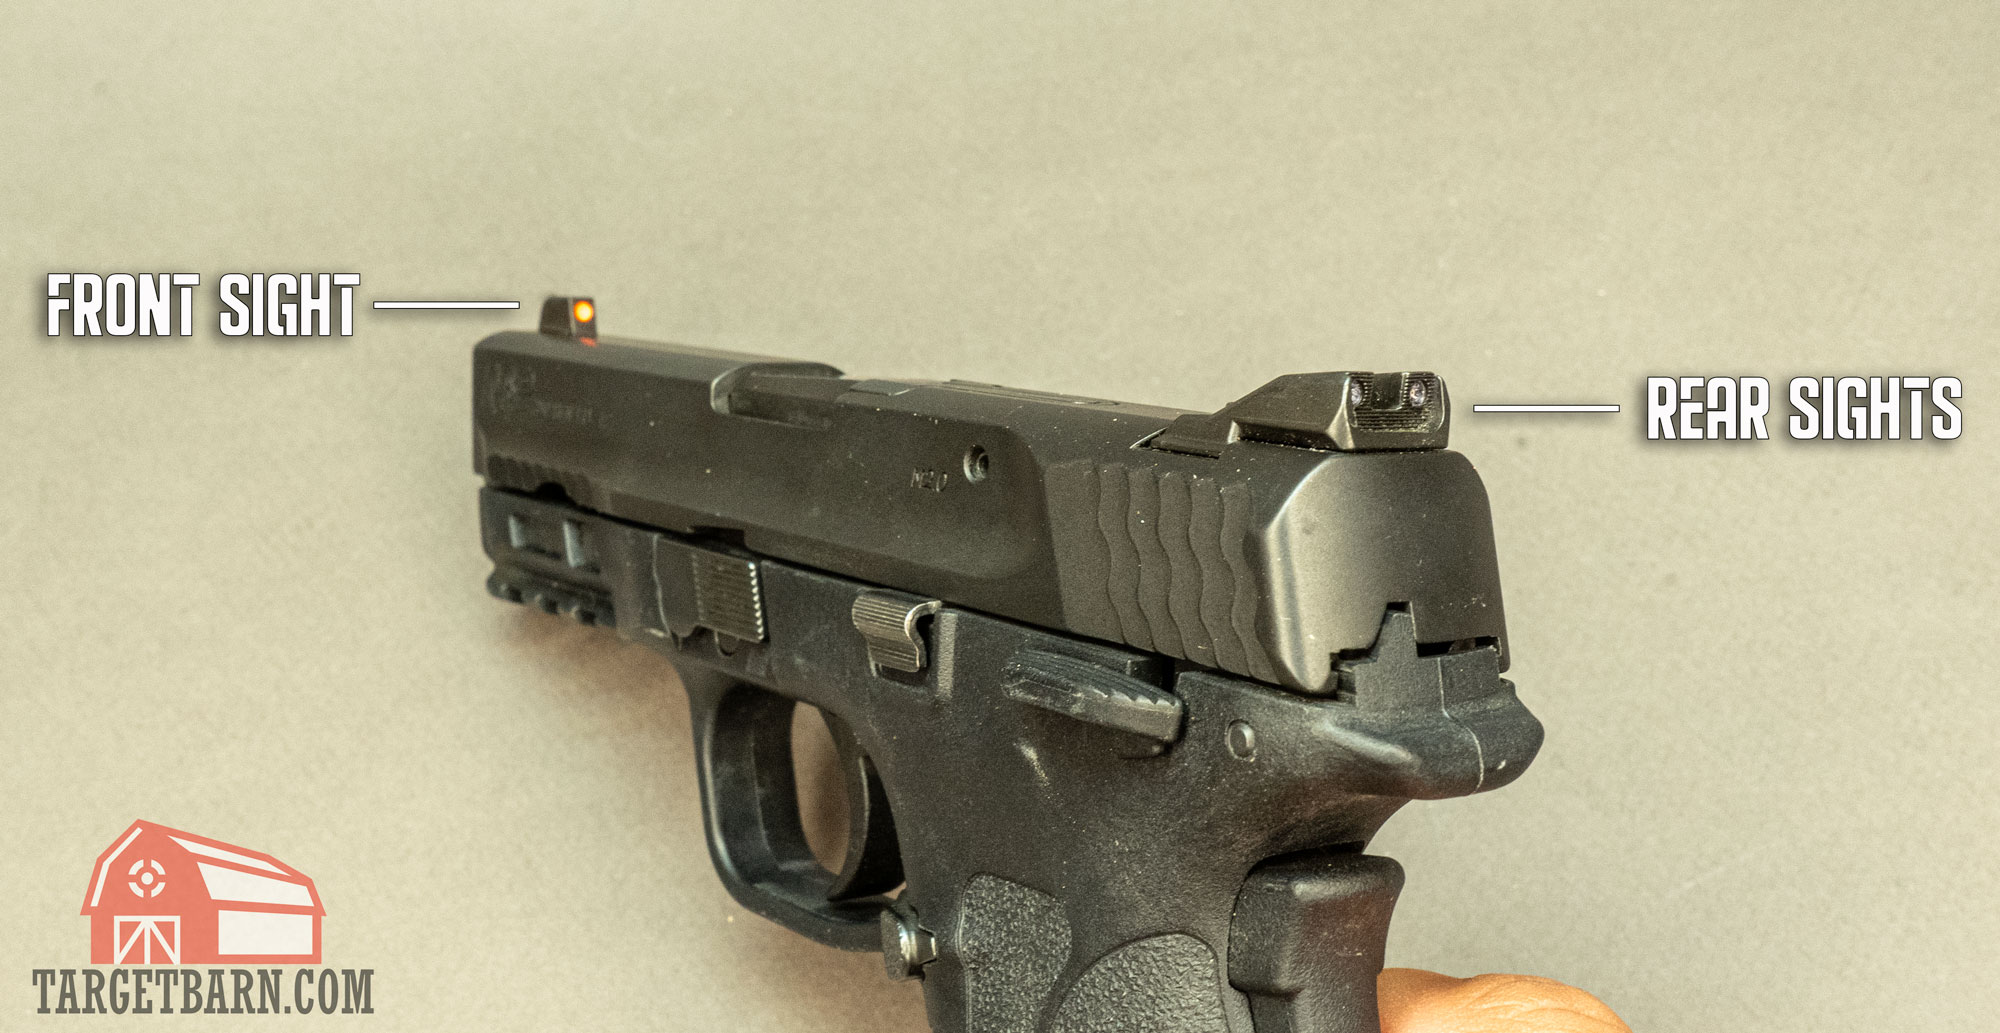 showing the front sight and rear sights on a pistol to show how to aim with iron sights